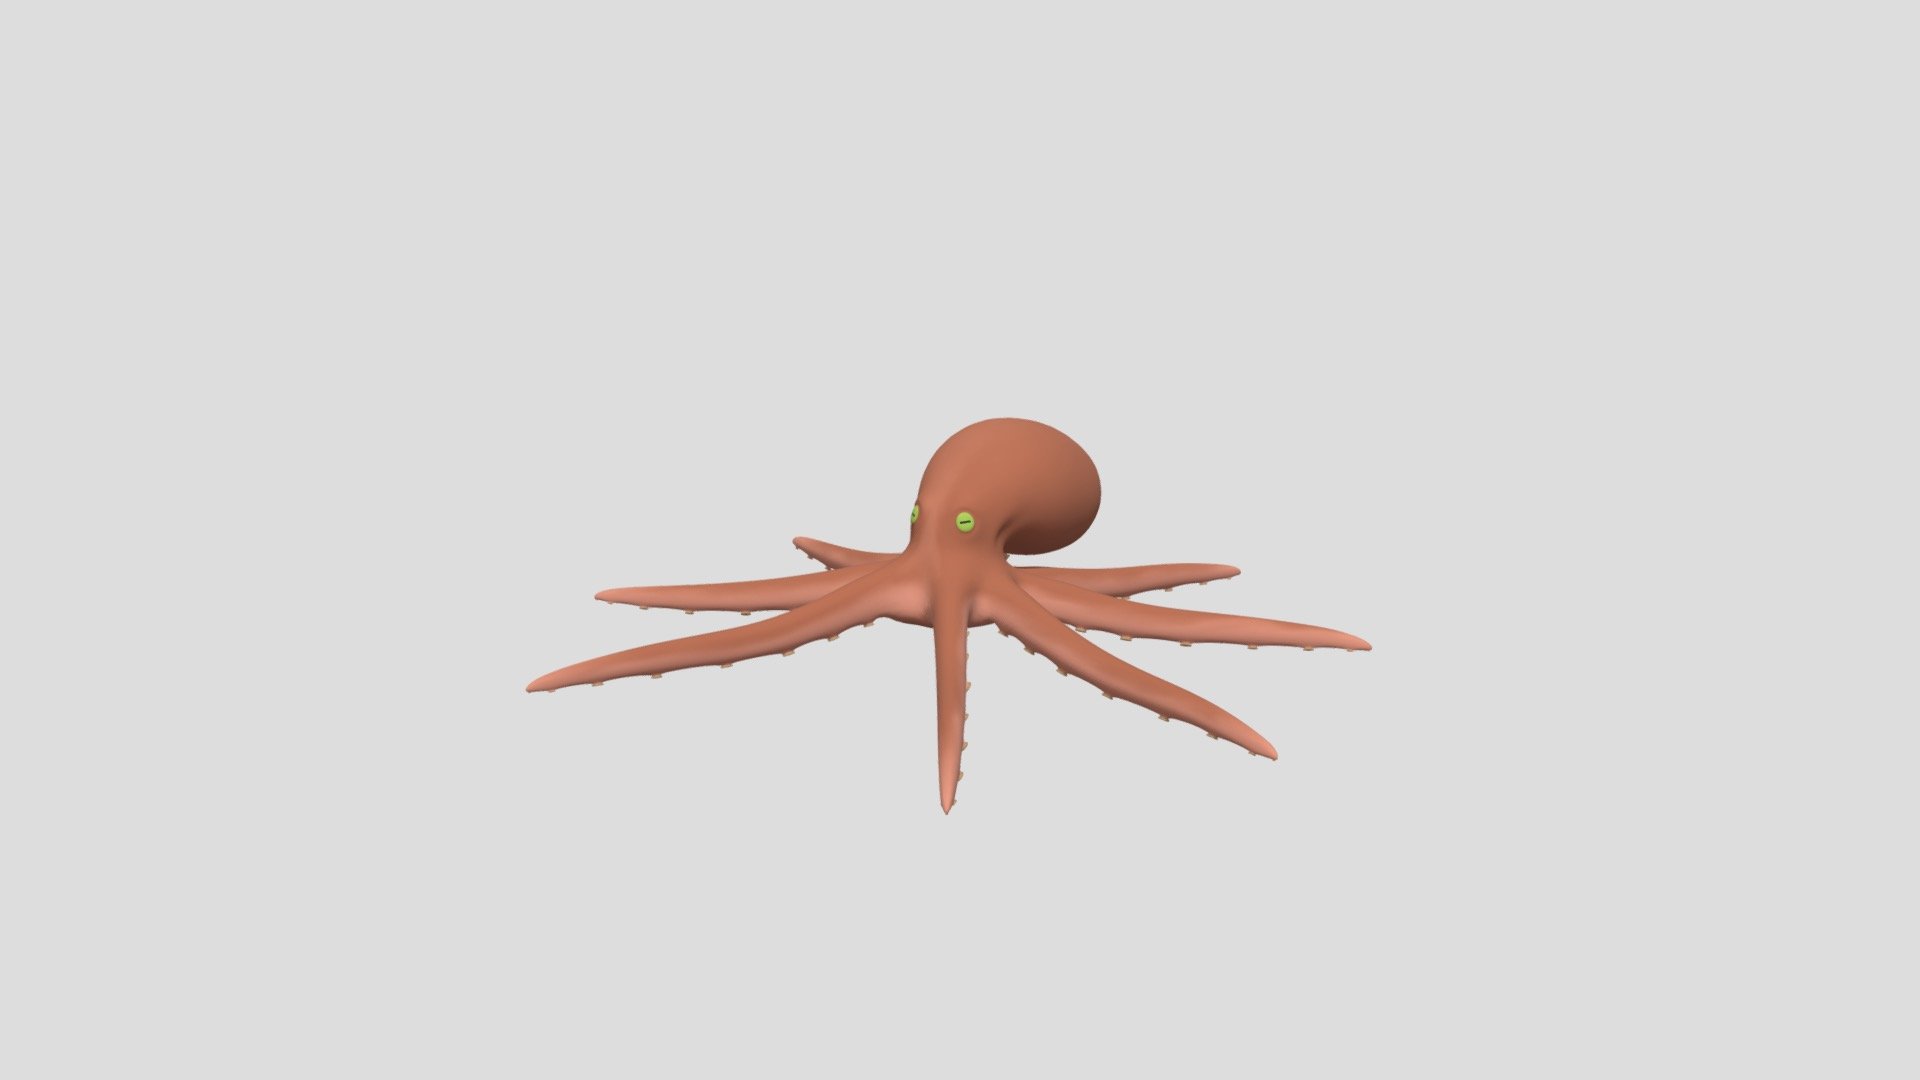 Subdivision: 1

Mirrored

Texture: 1024 x 1024

Has Normal Map (Noise Texture): 1024 x 1024

Materials: 1

Shapes: 1

Eyes_Open
Rigged (See Picture) Each tentacle has 7 bones.

I hope you enjoy the model 3d model